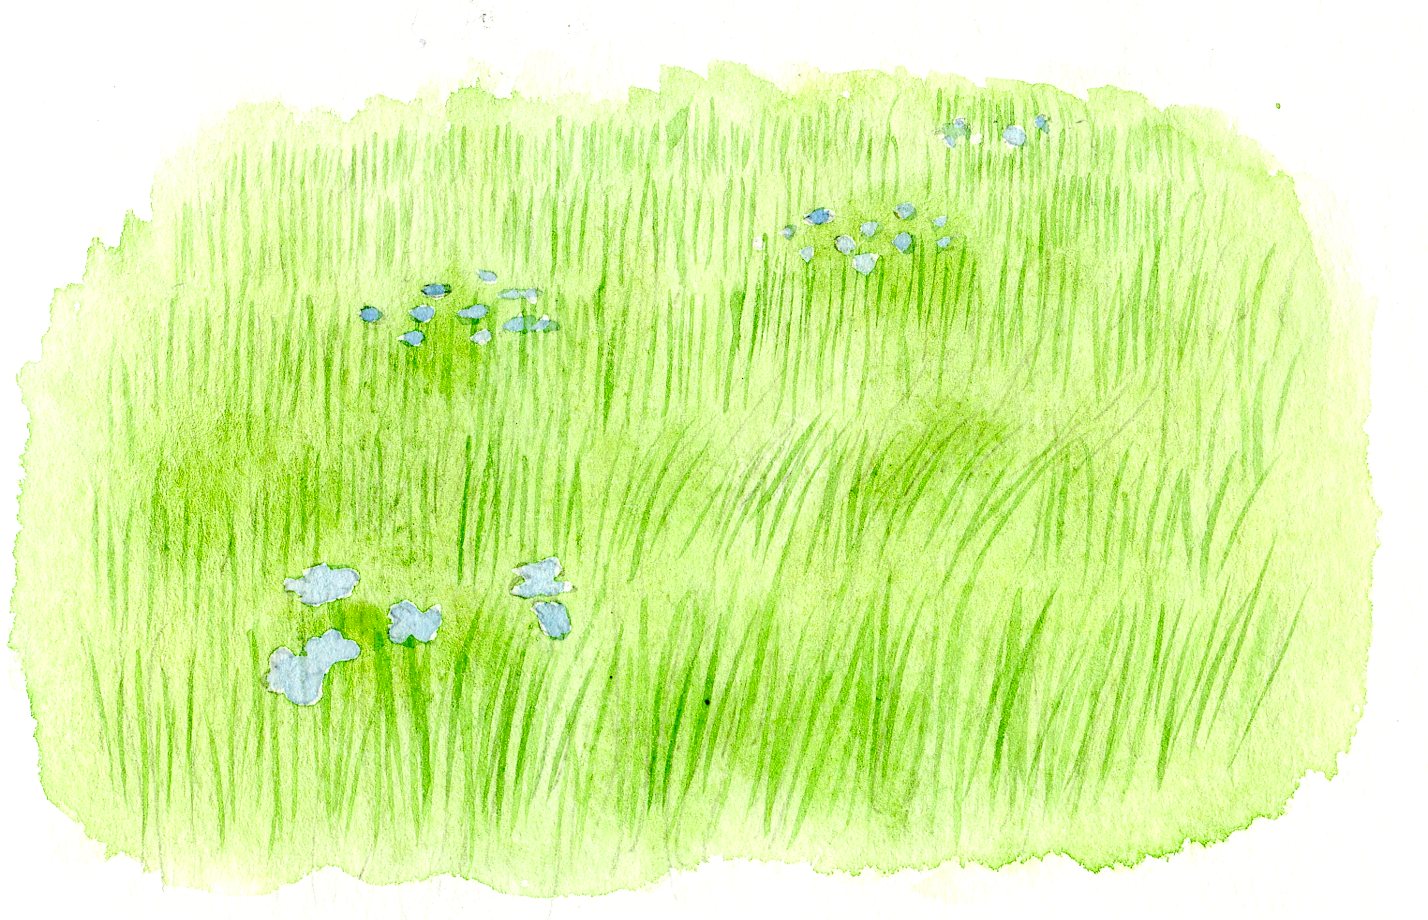 Learn how to paint grass that creates depth and distance in your composition